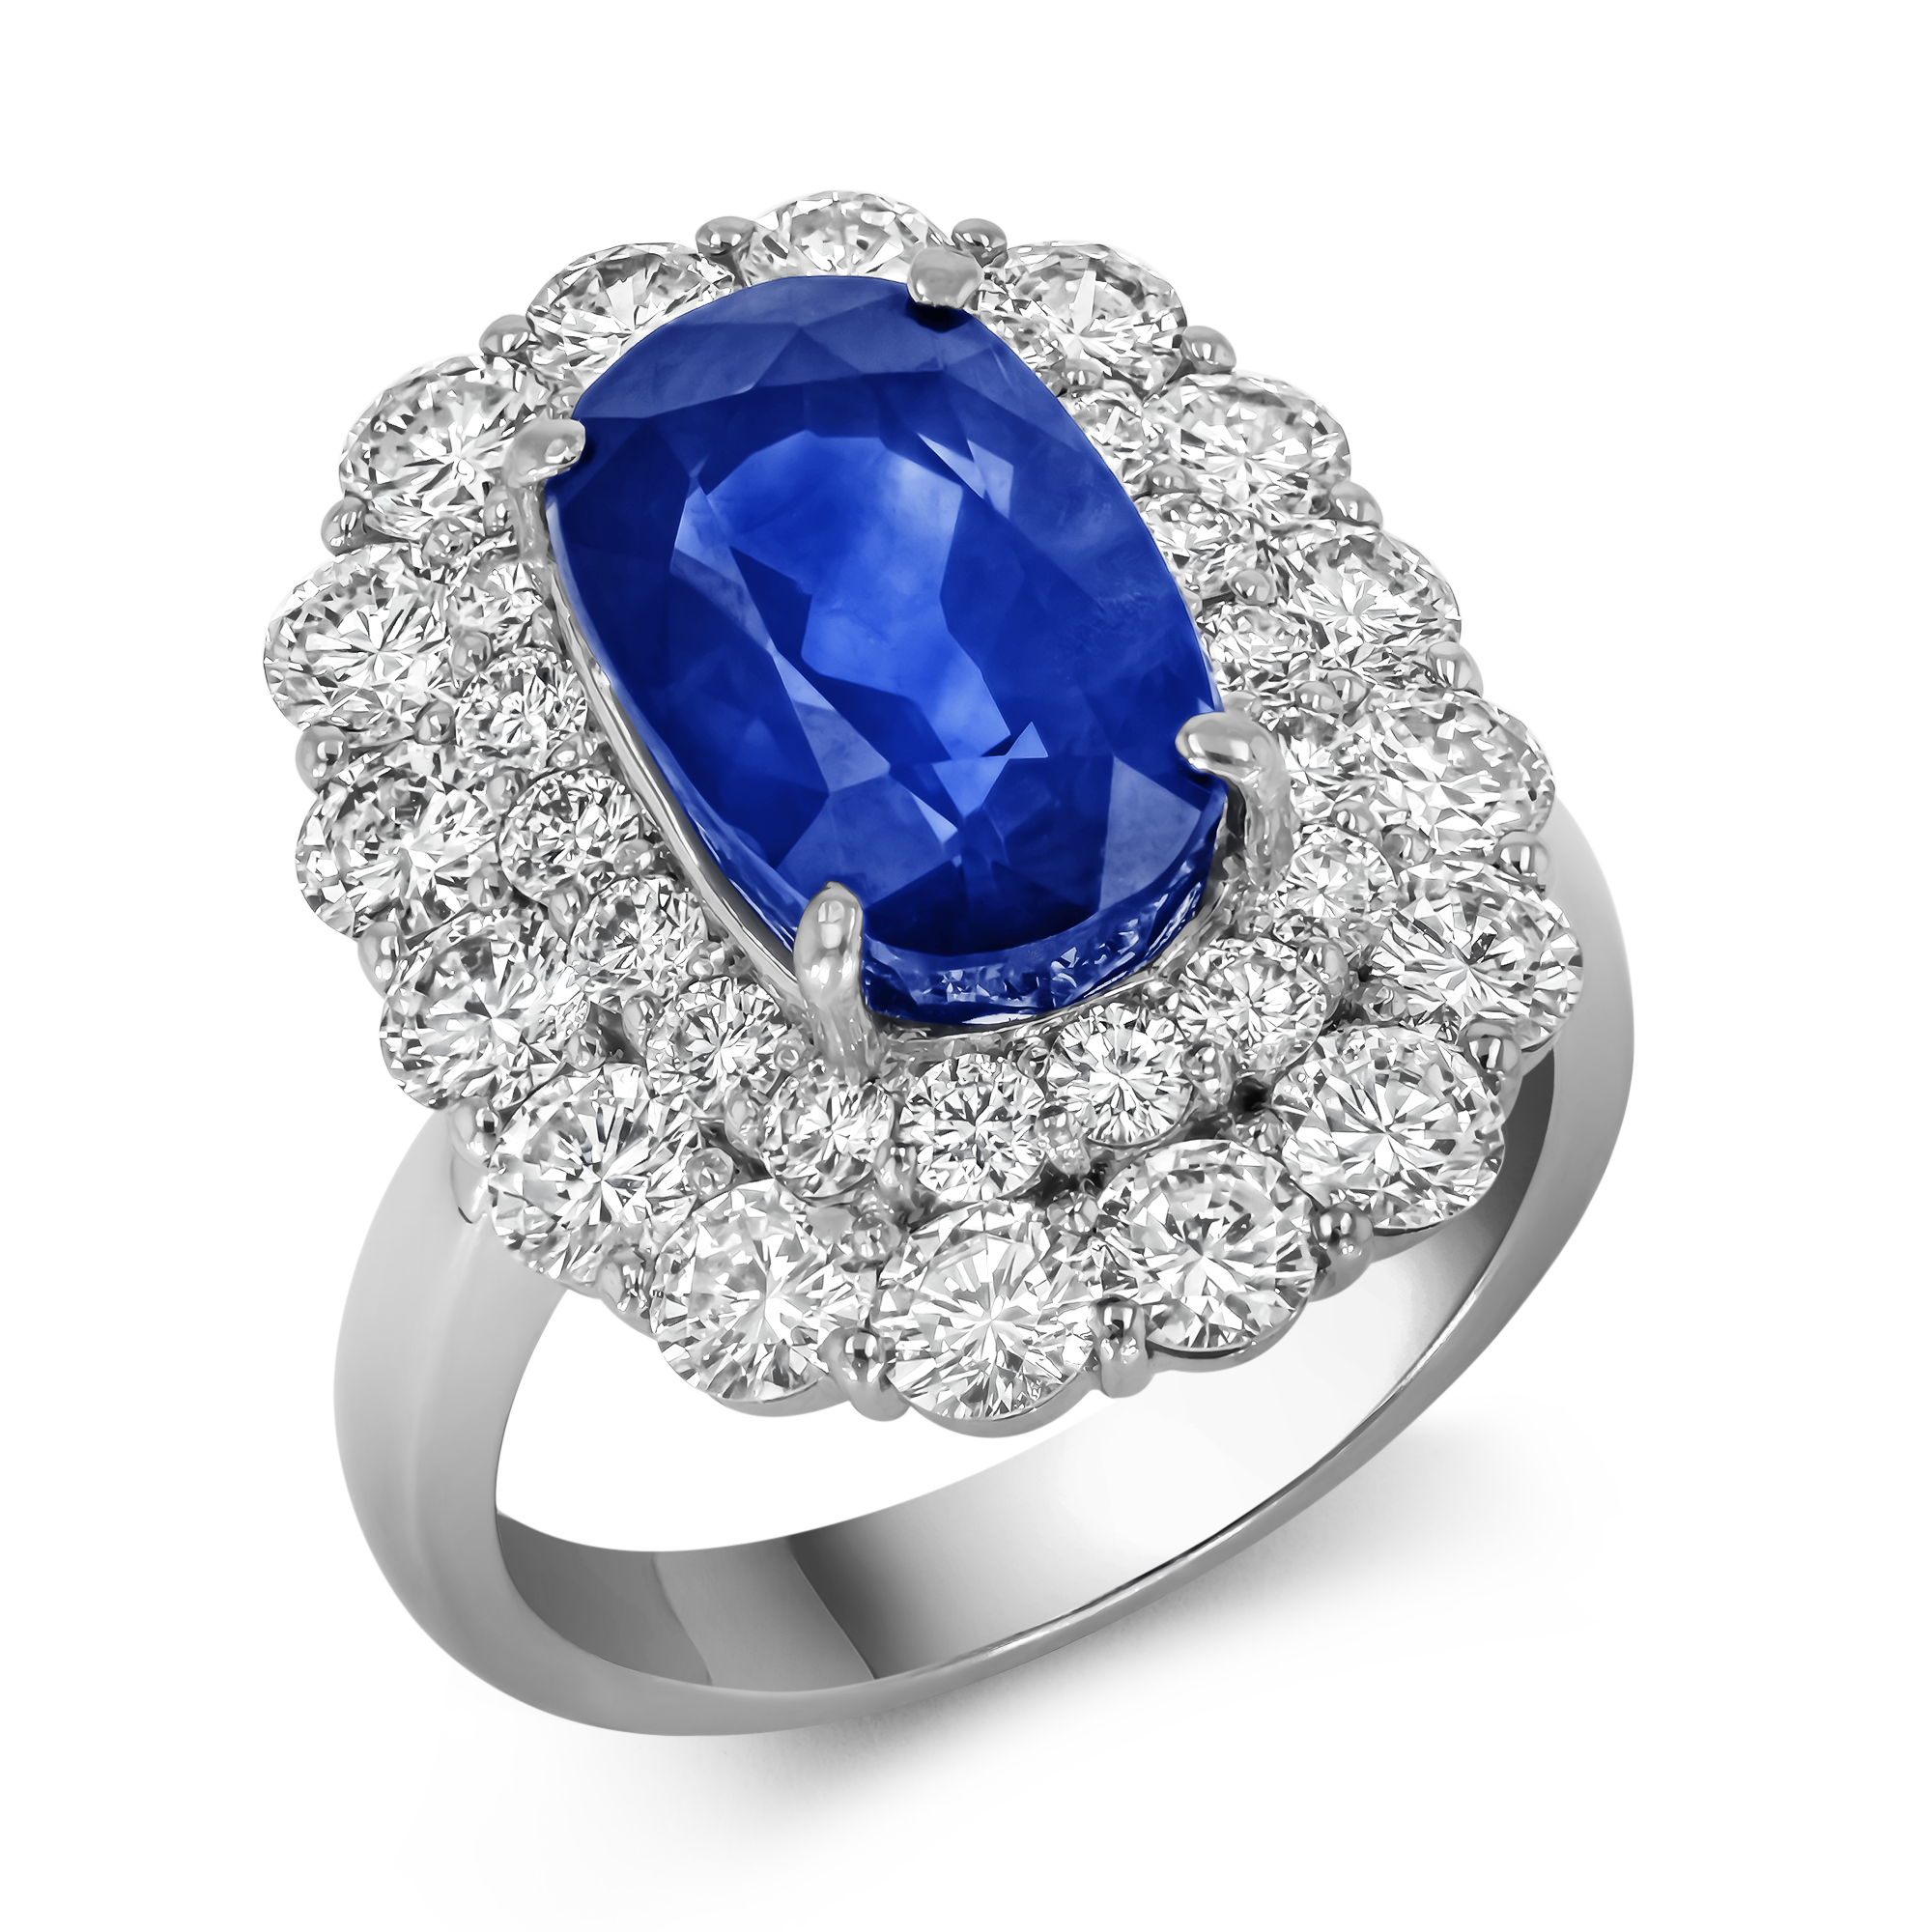 Sapphire Cluster Ring with Diamond Surround Oval Cut, Claw Set_1